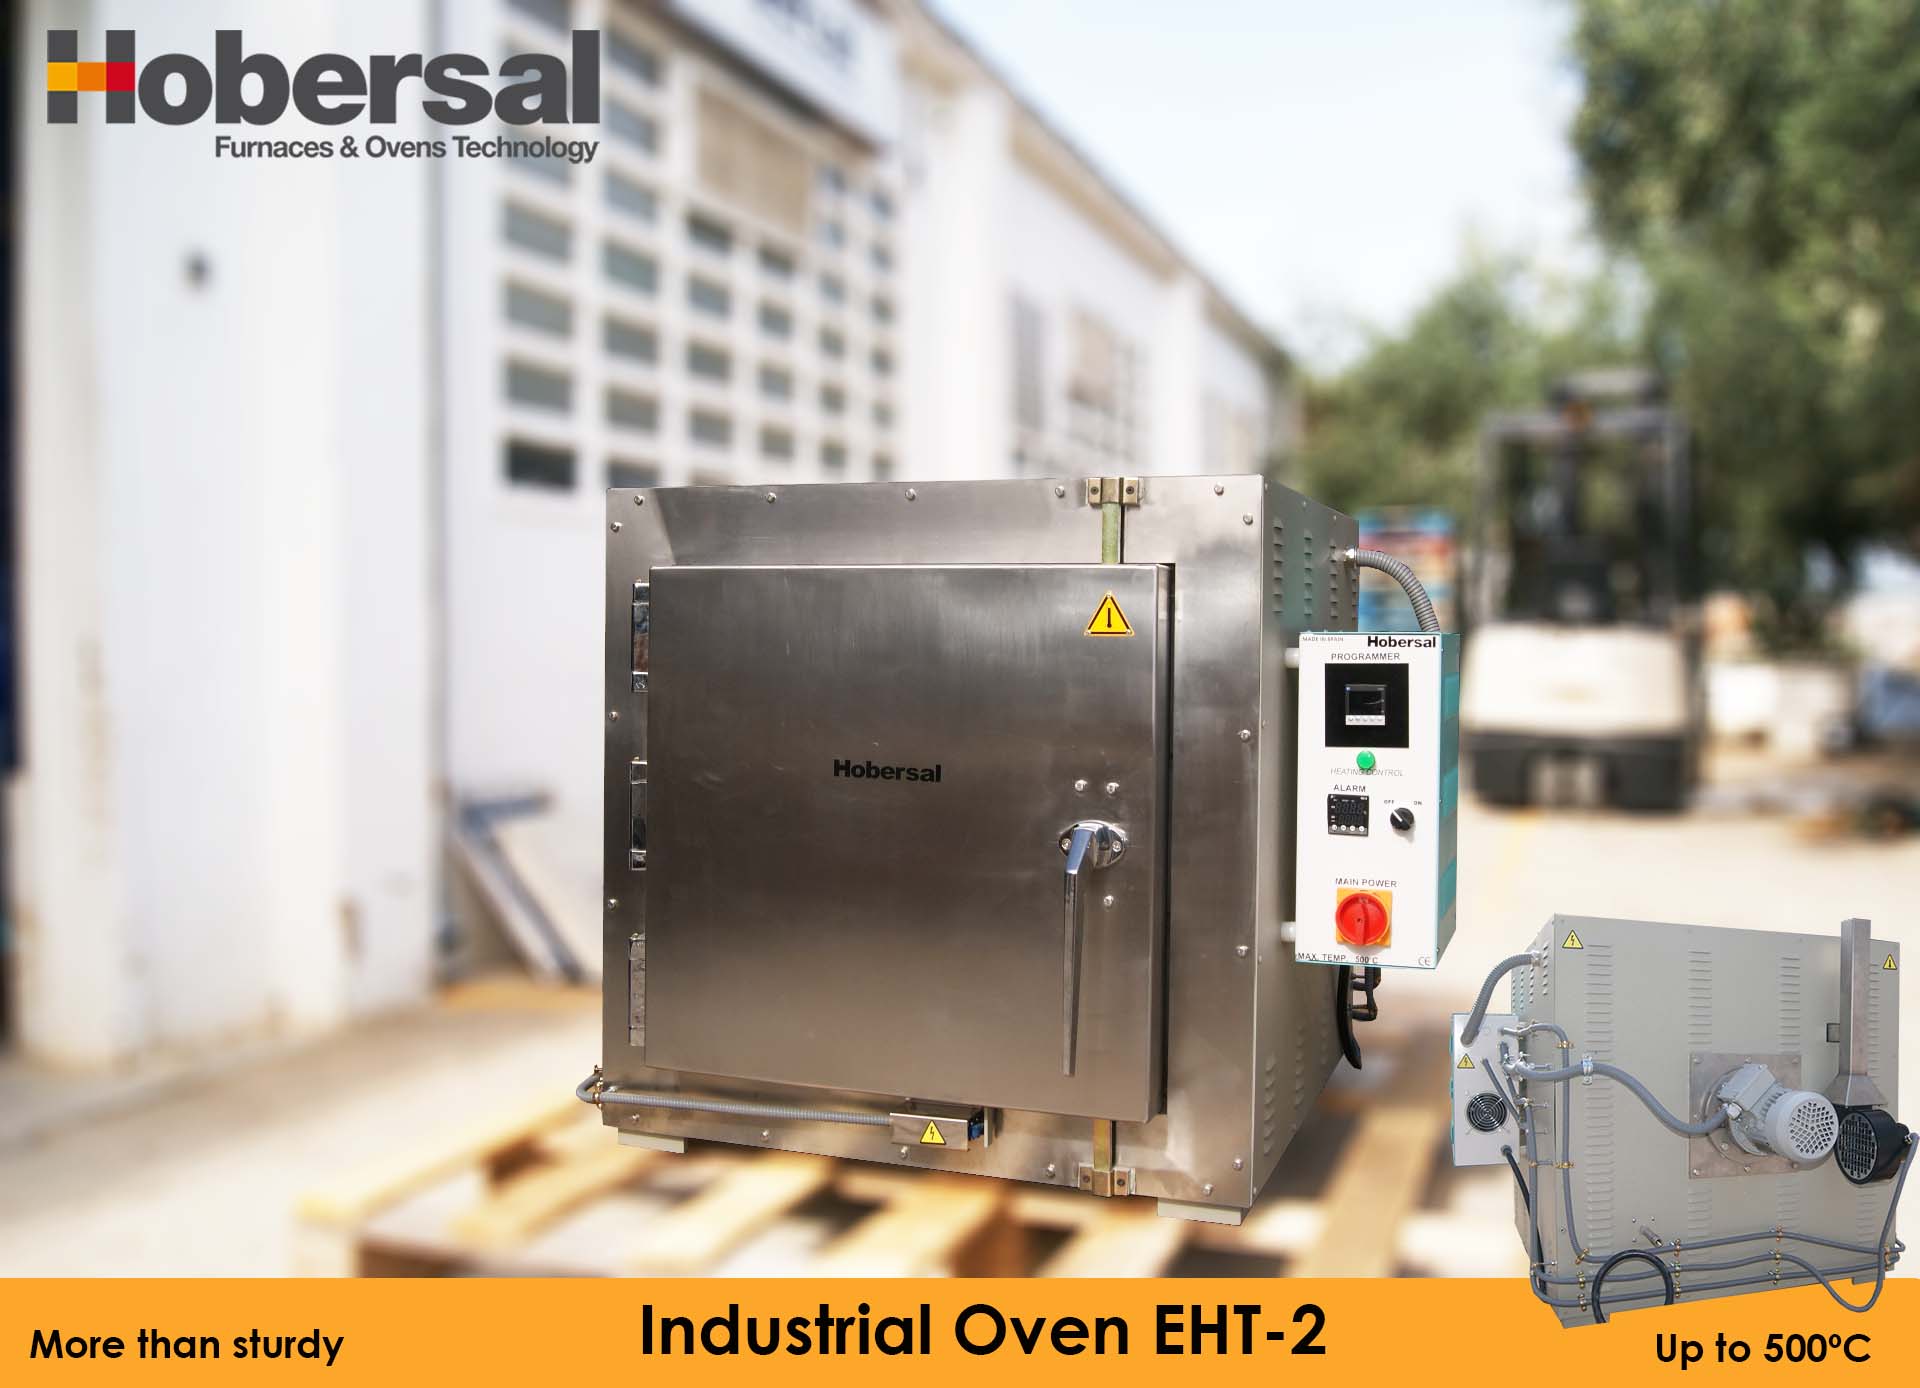 Industrial Ovens up to 500ºC